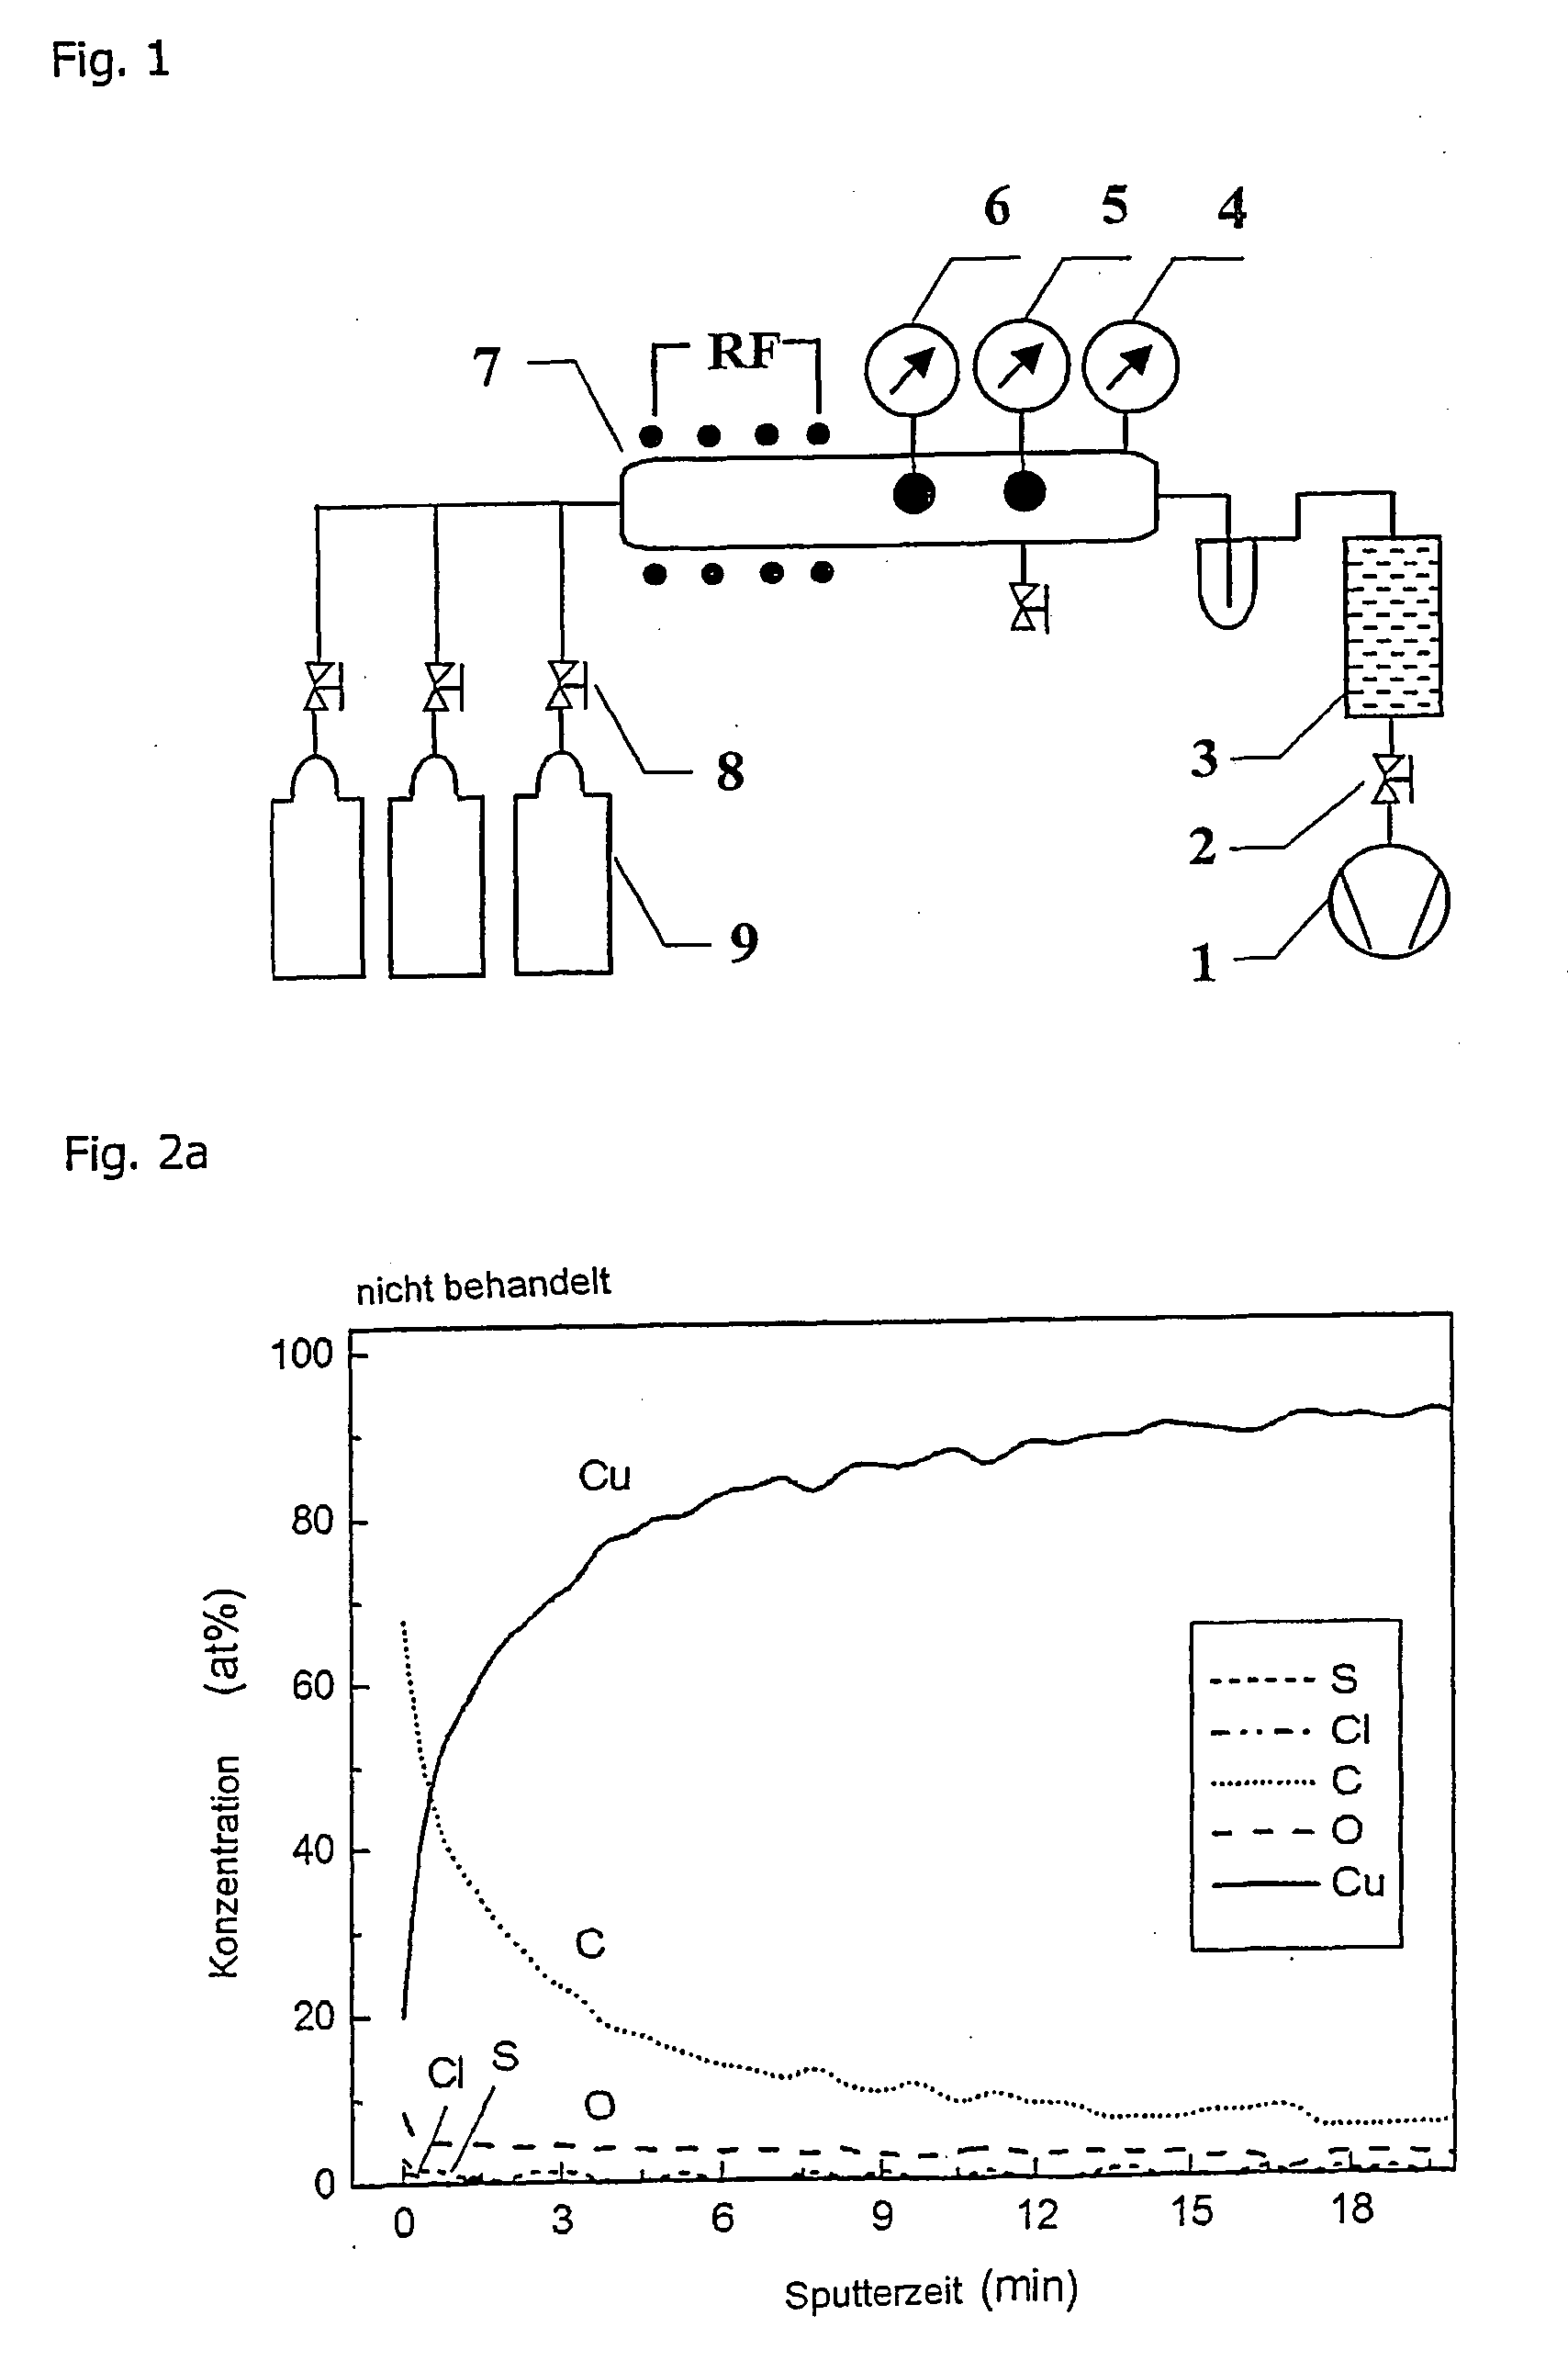 Plasma treatment for purifying copper or nickel